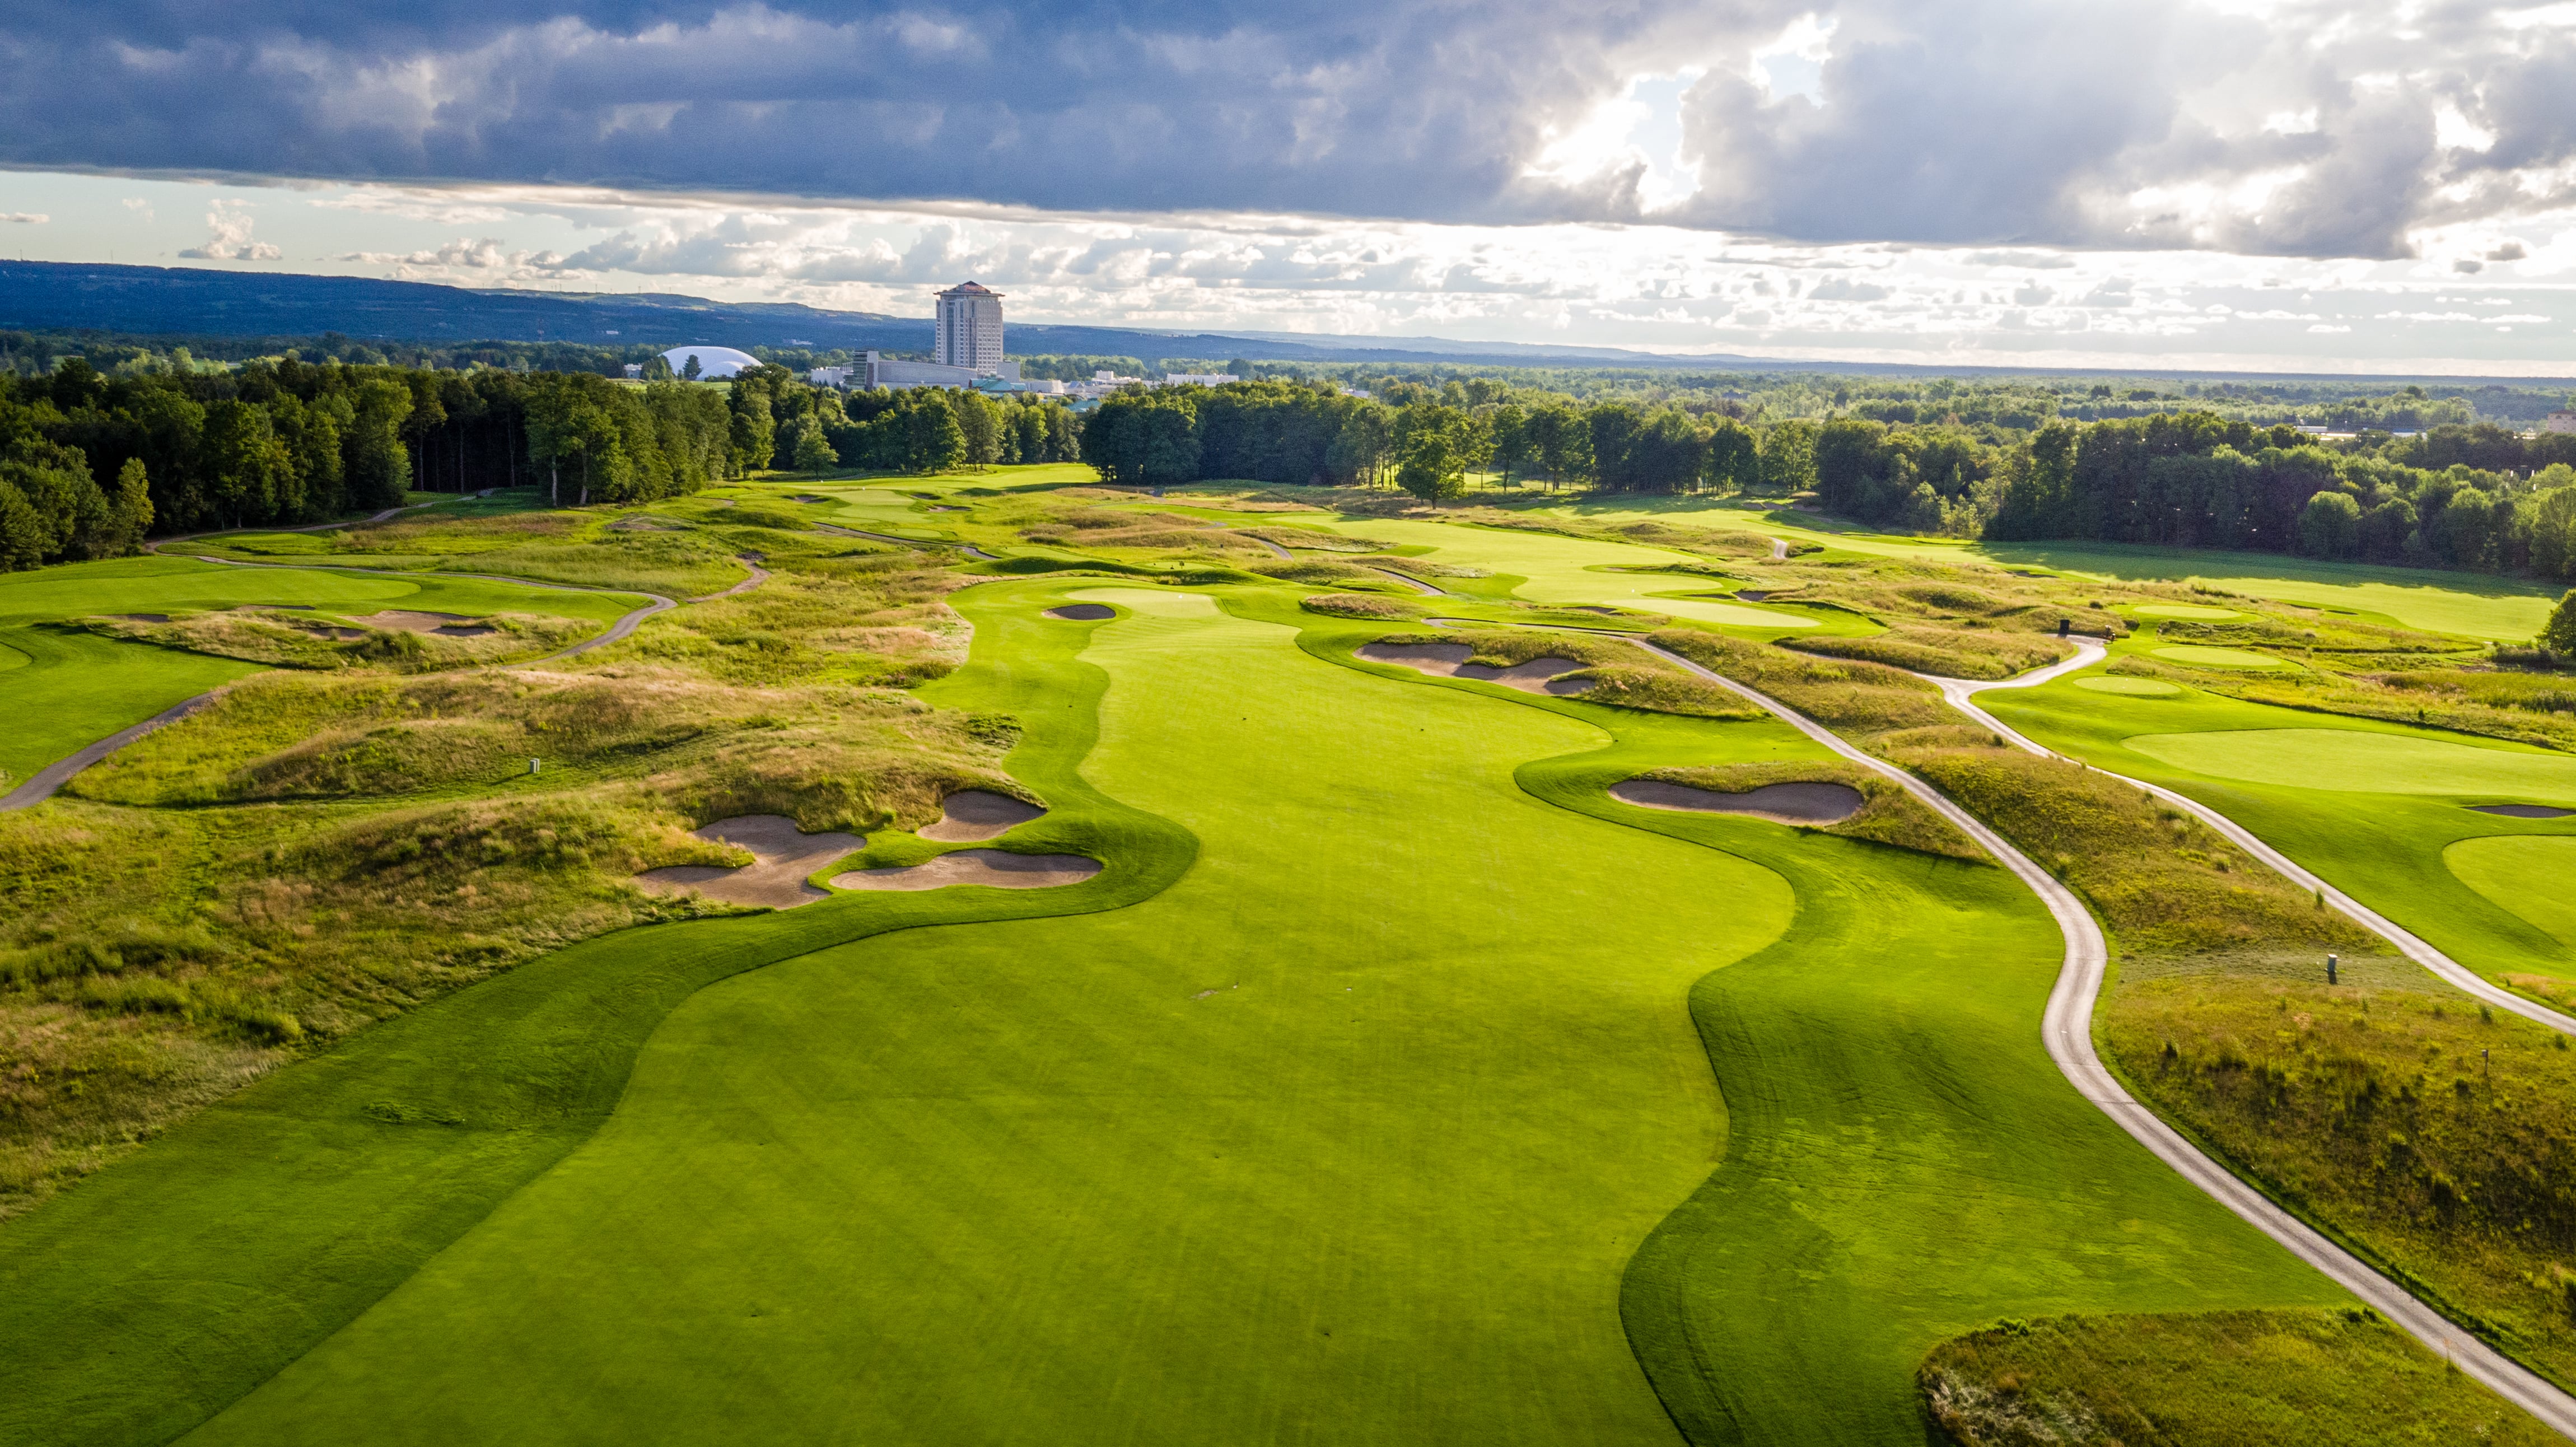 Aerial view of Shenendoah Golf Course at Turning Stone Resort Casino in New York